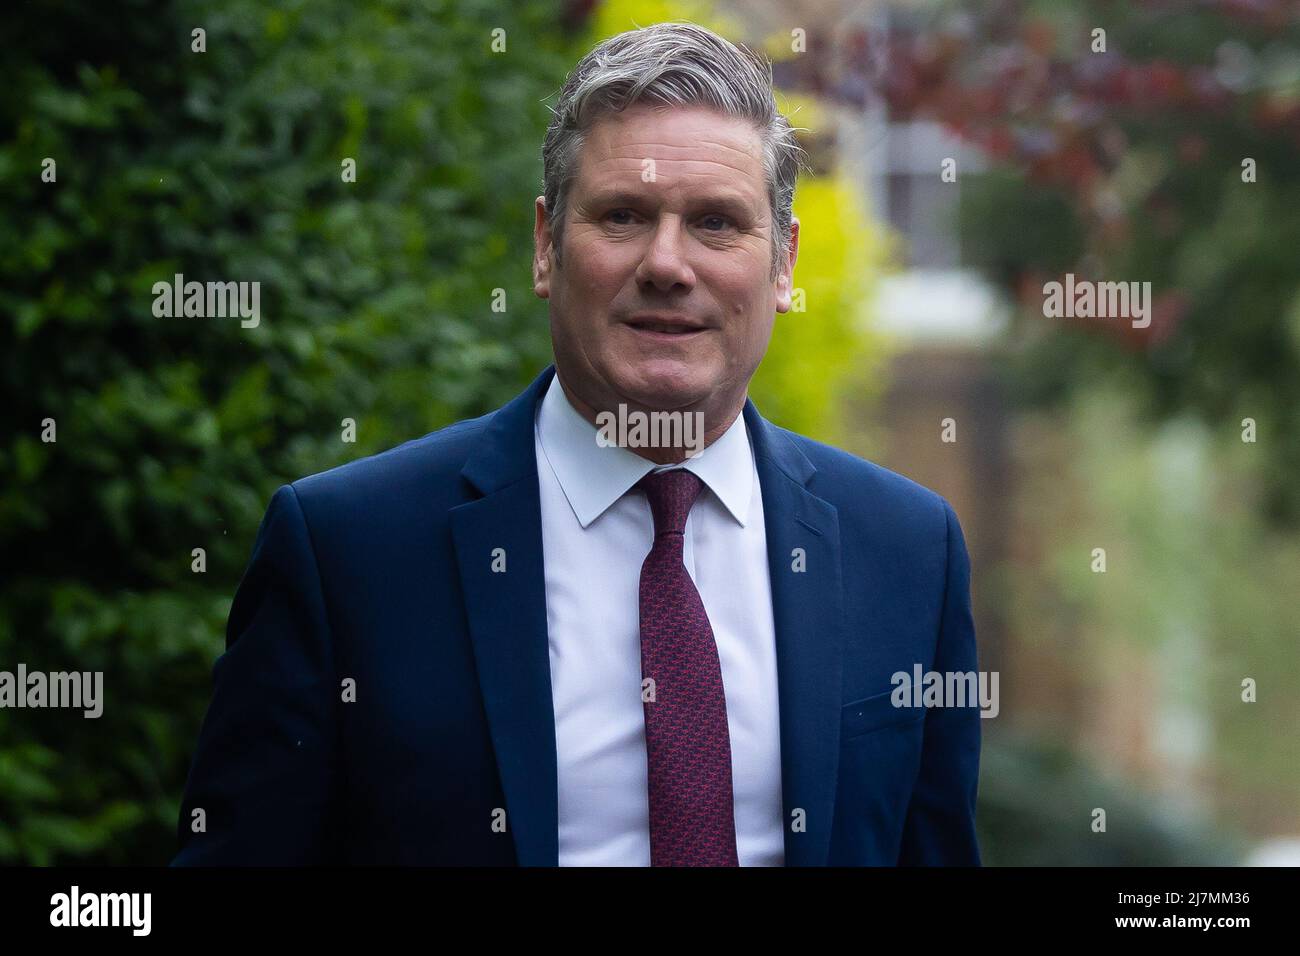 May 10, 2022, London, United Kingdom: Sir Keir Starmer leaves his home ahead of the State Opening of Parliament. The Labour Leader said he will step down if the police fine him for breaking covid lockdown rules. (Credit Image: © Tejas Sandhu/SOPA Images via ZUMA Press Wire) Stock Photo